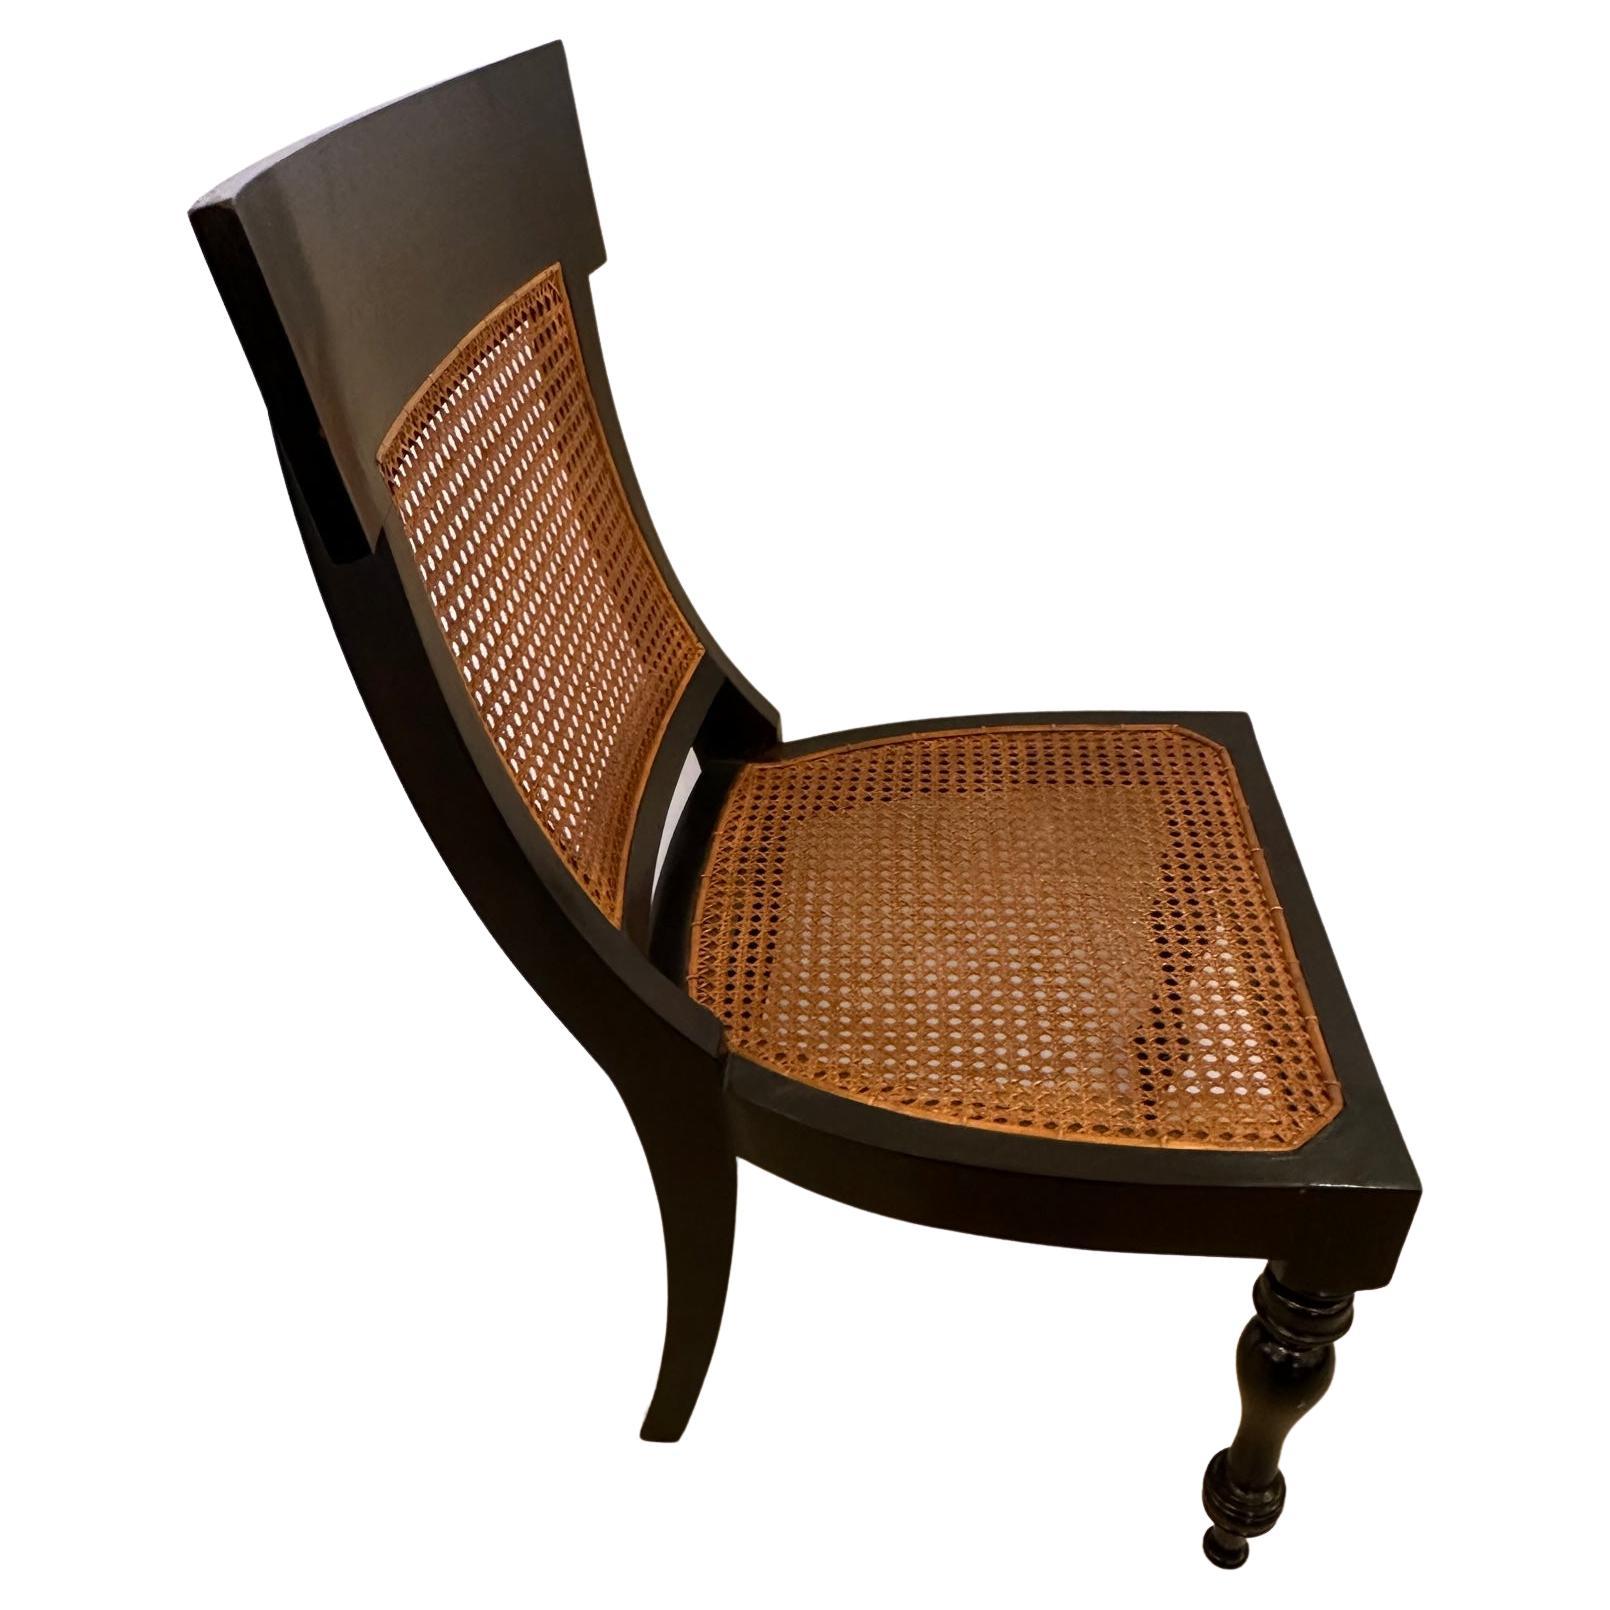 Great looking side or desk chair with roomy proportions mixing an ebonized wood body and rich brown caned back and seat. The back has an elegant curve and the front legs are sculpted.
Note: matching armchair is available.